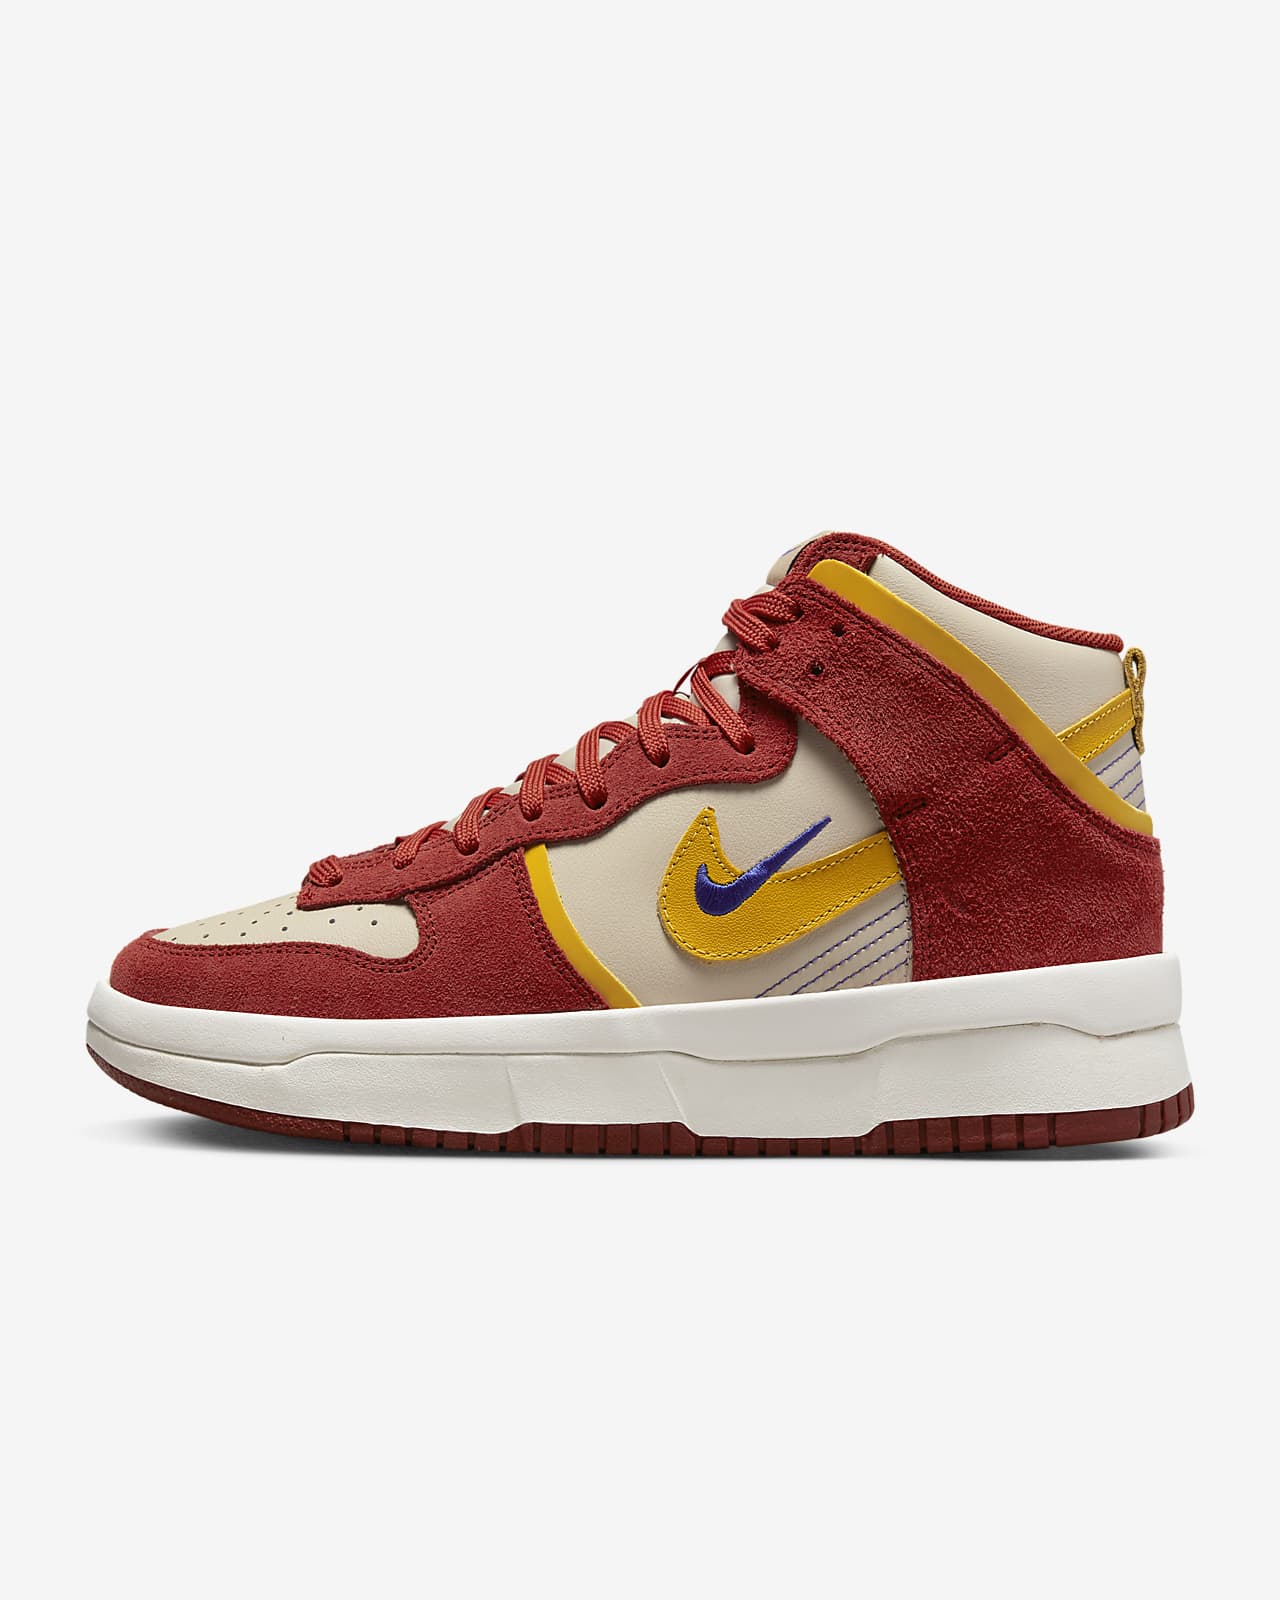 Chaussures Nike Dunk High pour Femme. Nike FR